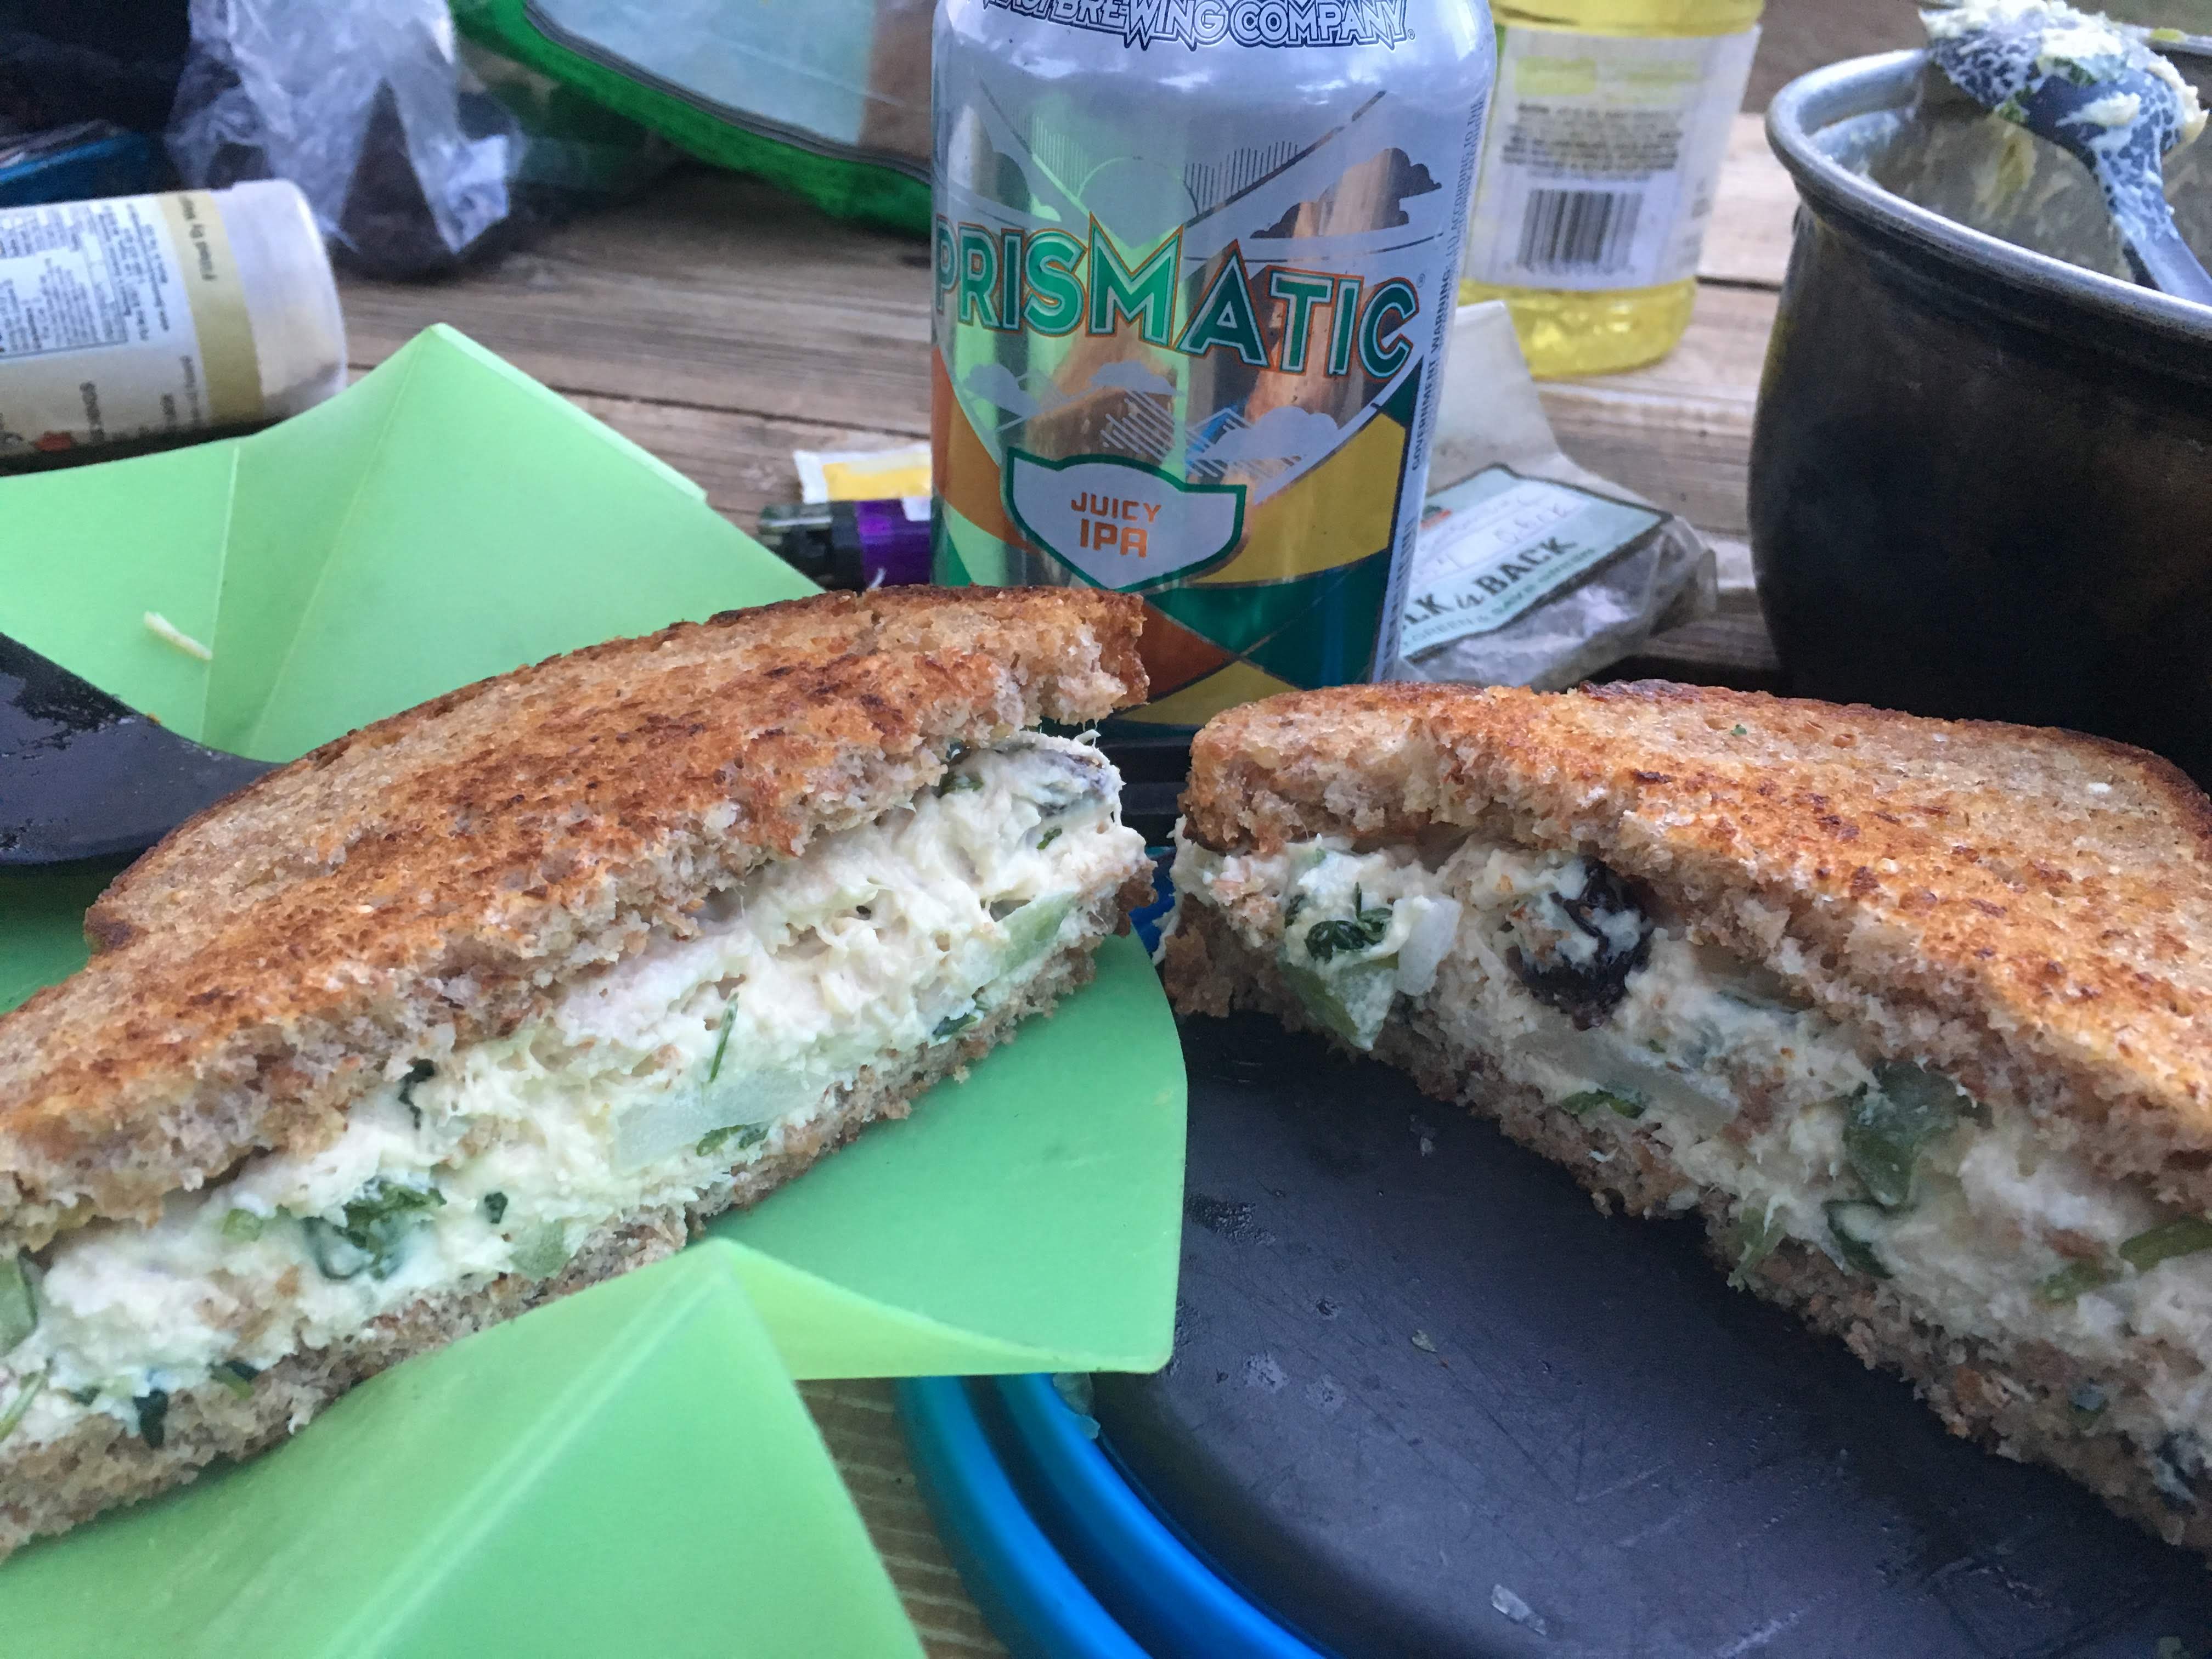 We had some innovations in our camp cooking at Smith Rock. We made chicken salad sandwiches.